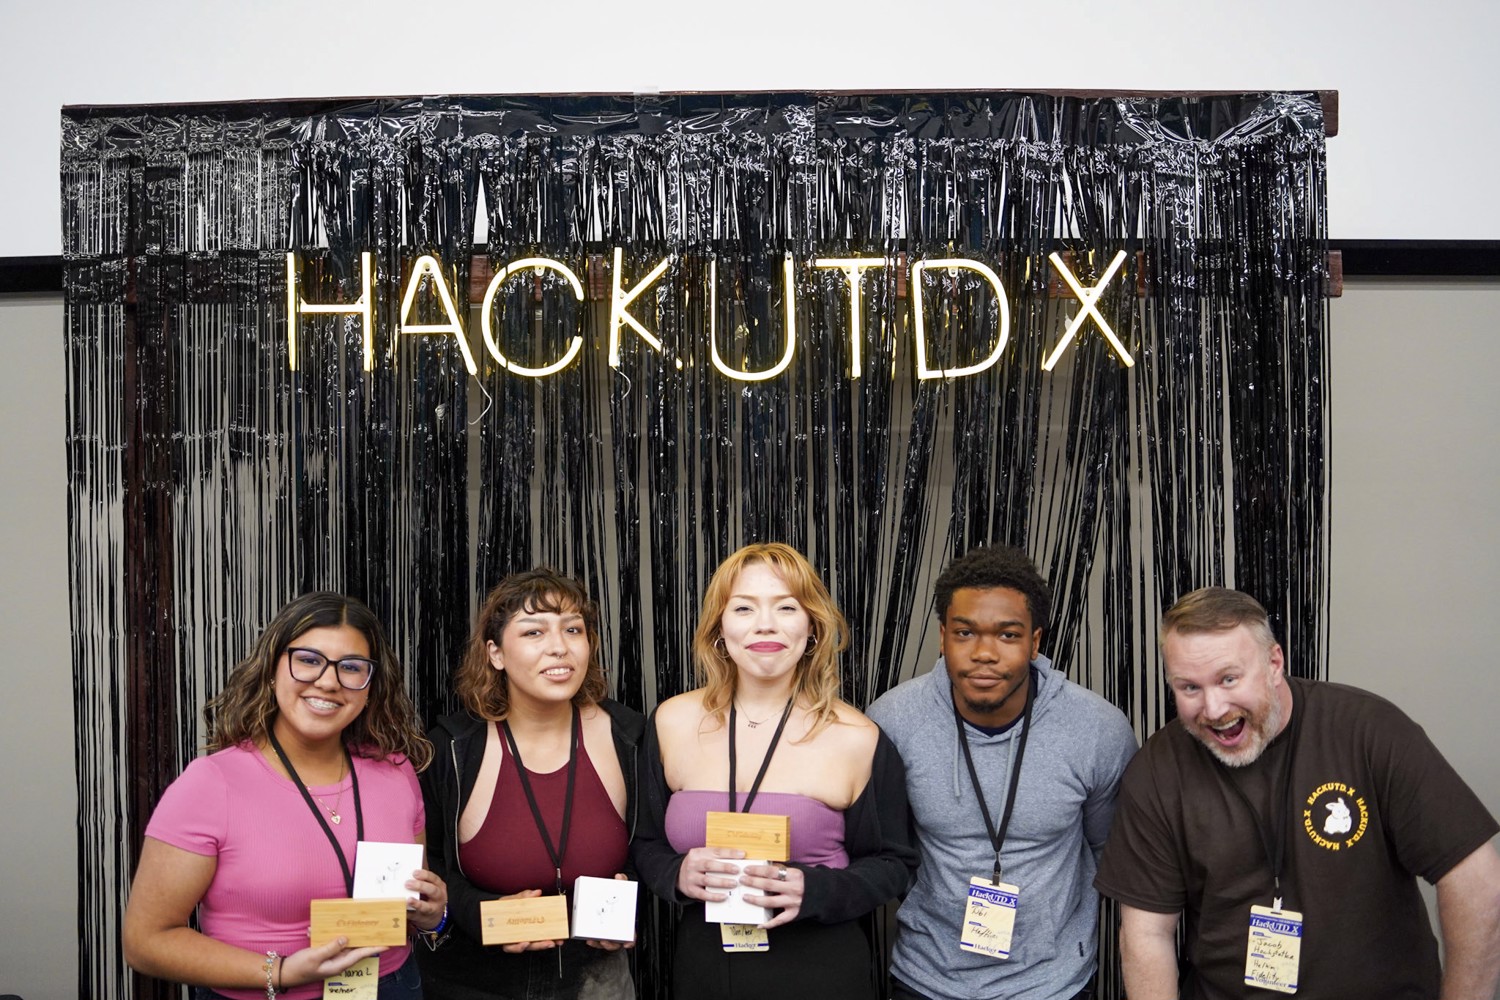 Fast-growing Technology Club Garners Multiple Wins at Hacking Competitions